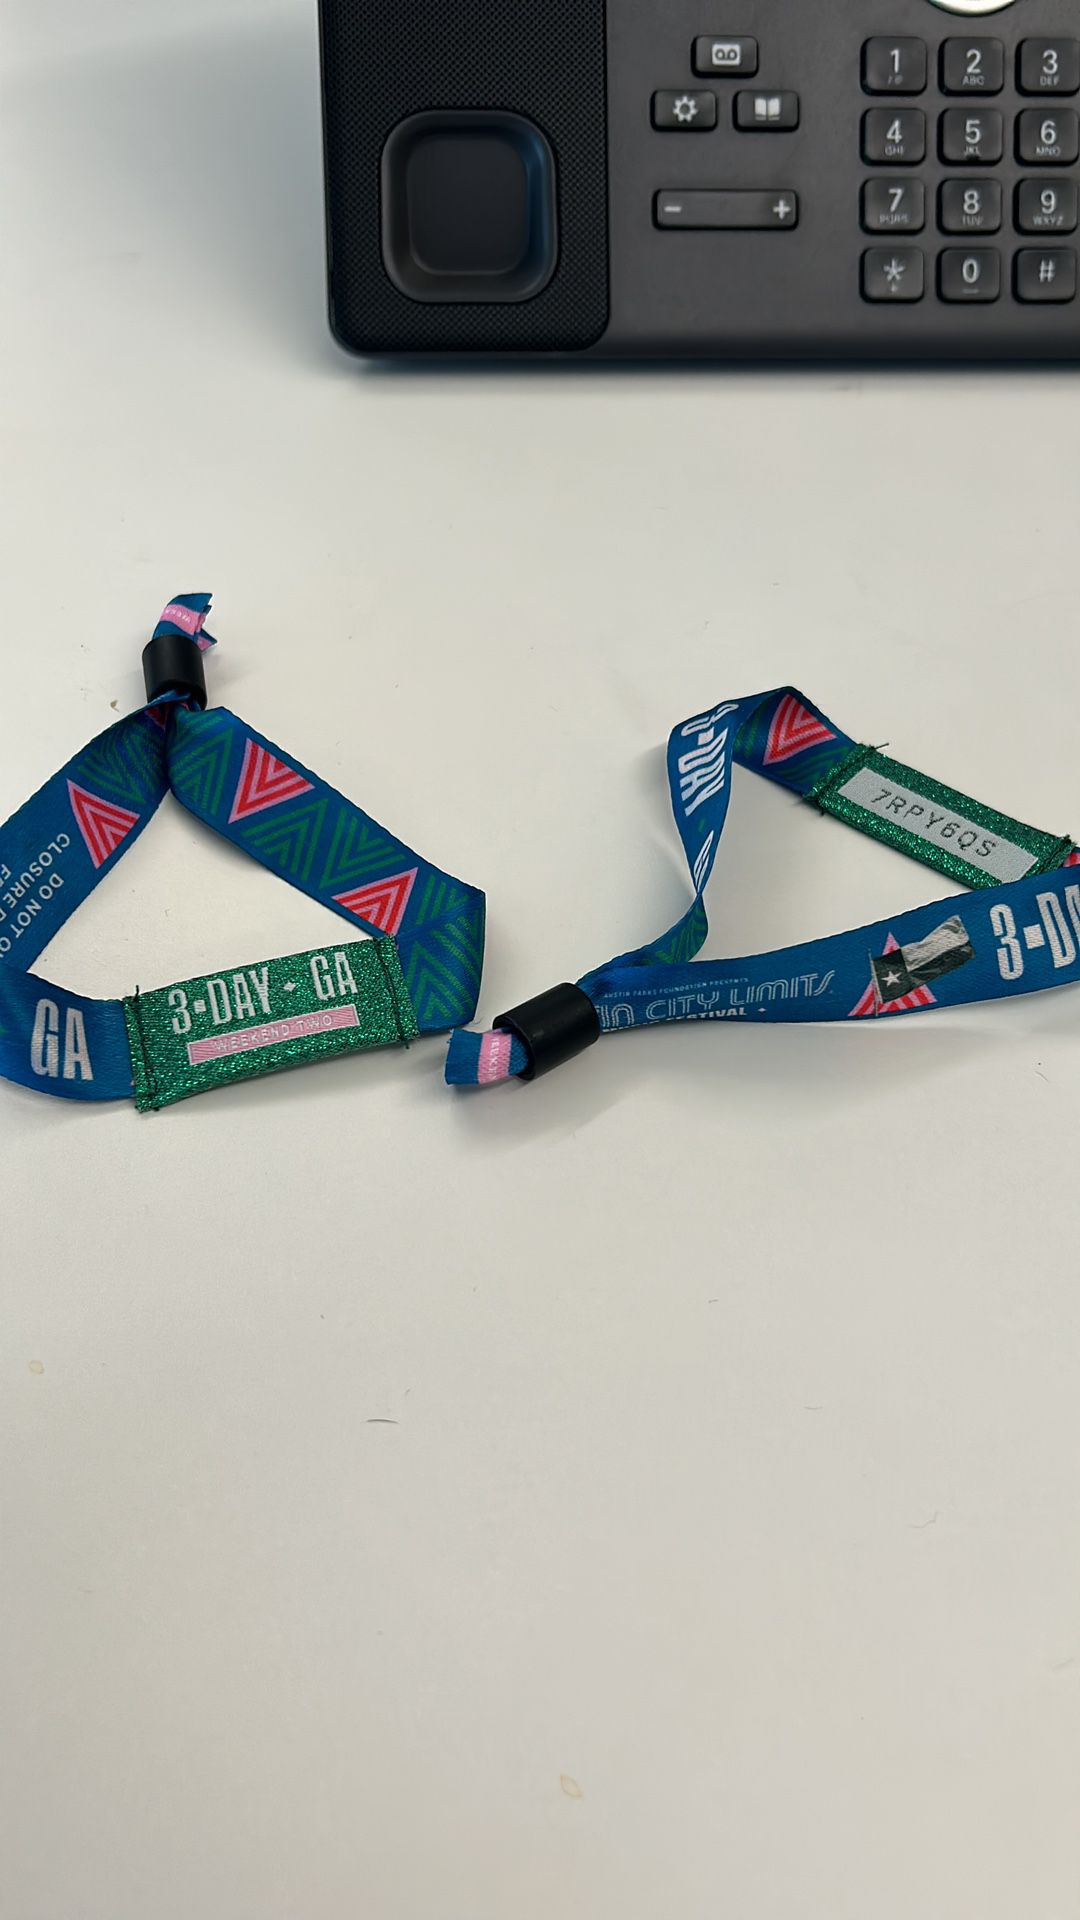 ACL Bands - Weekend 2 - 3 Day Pass